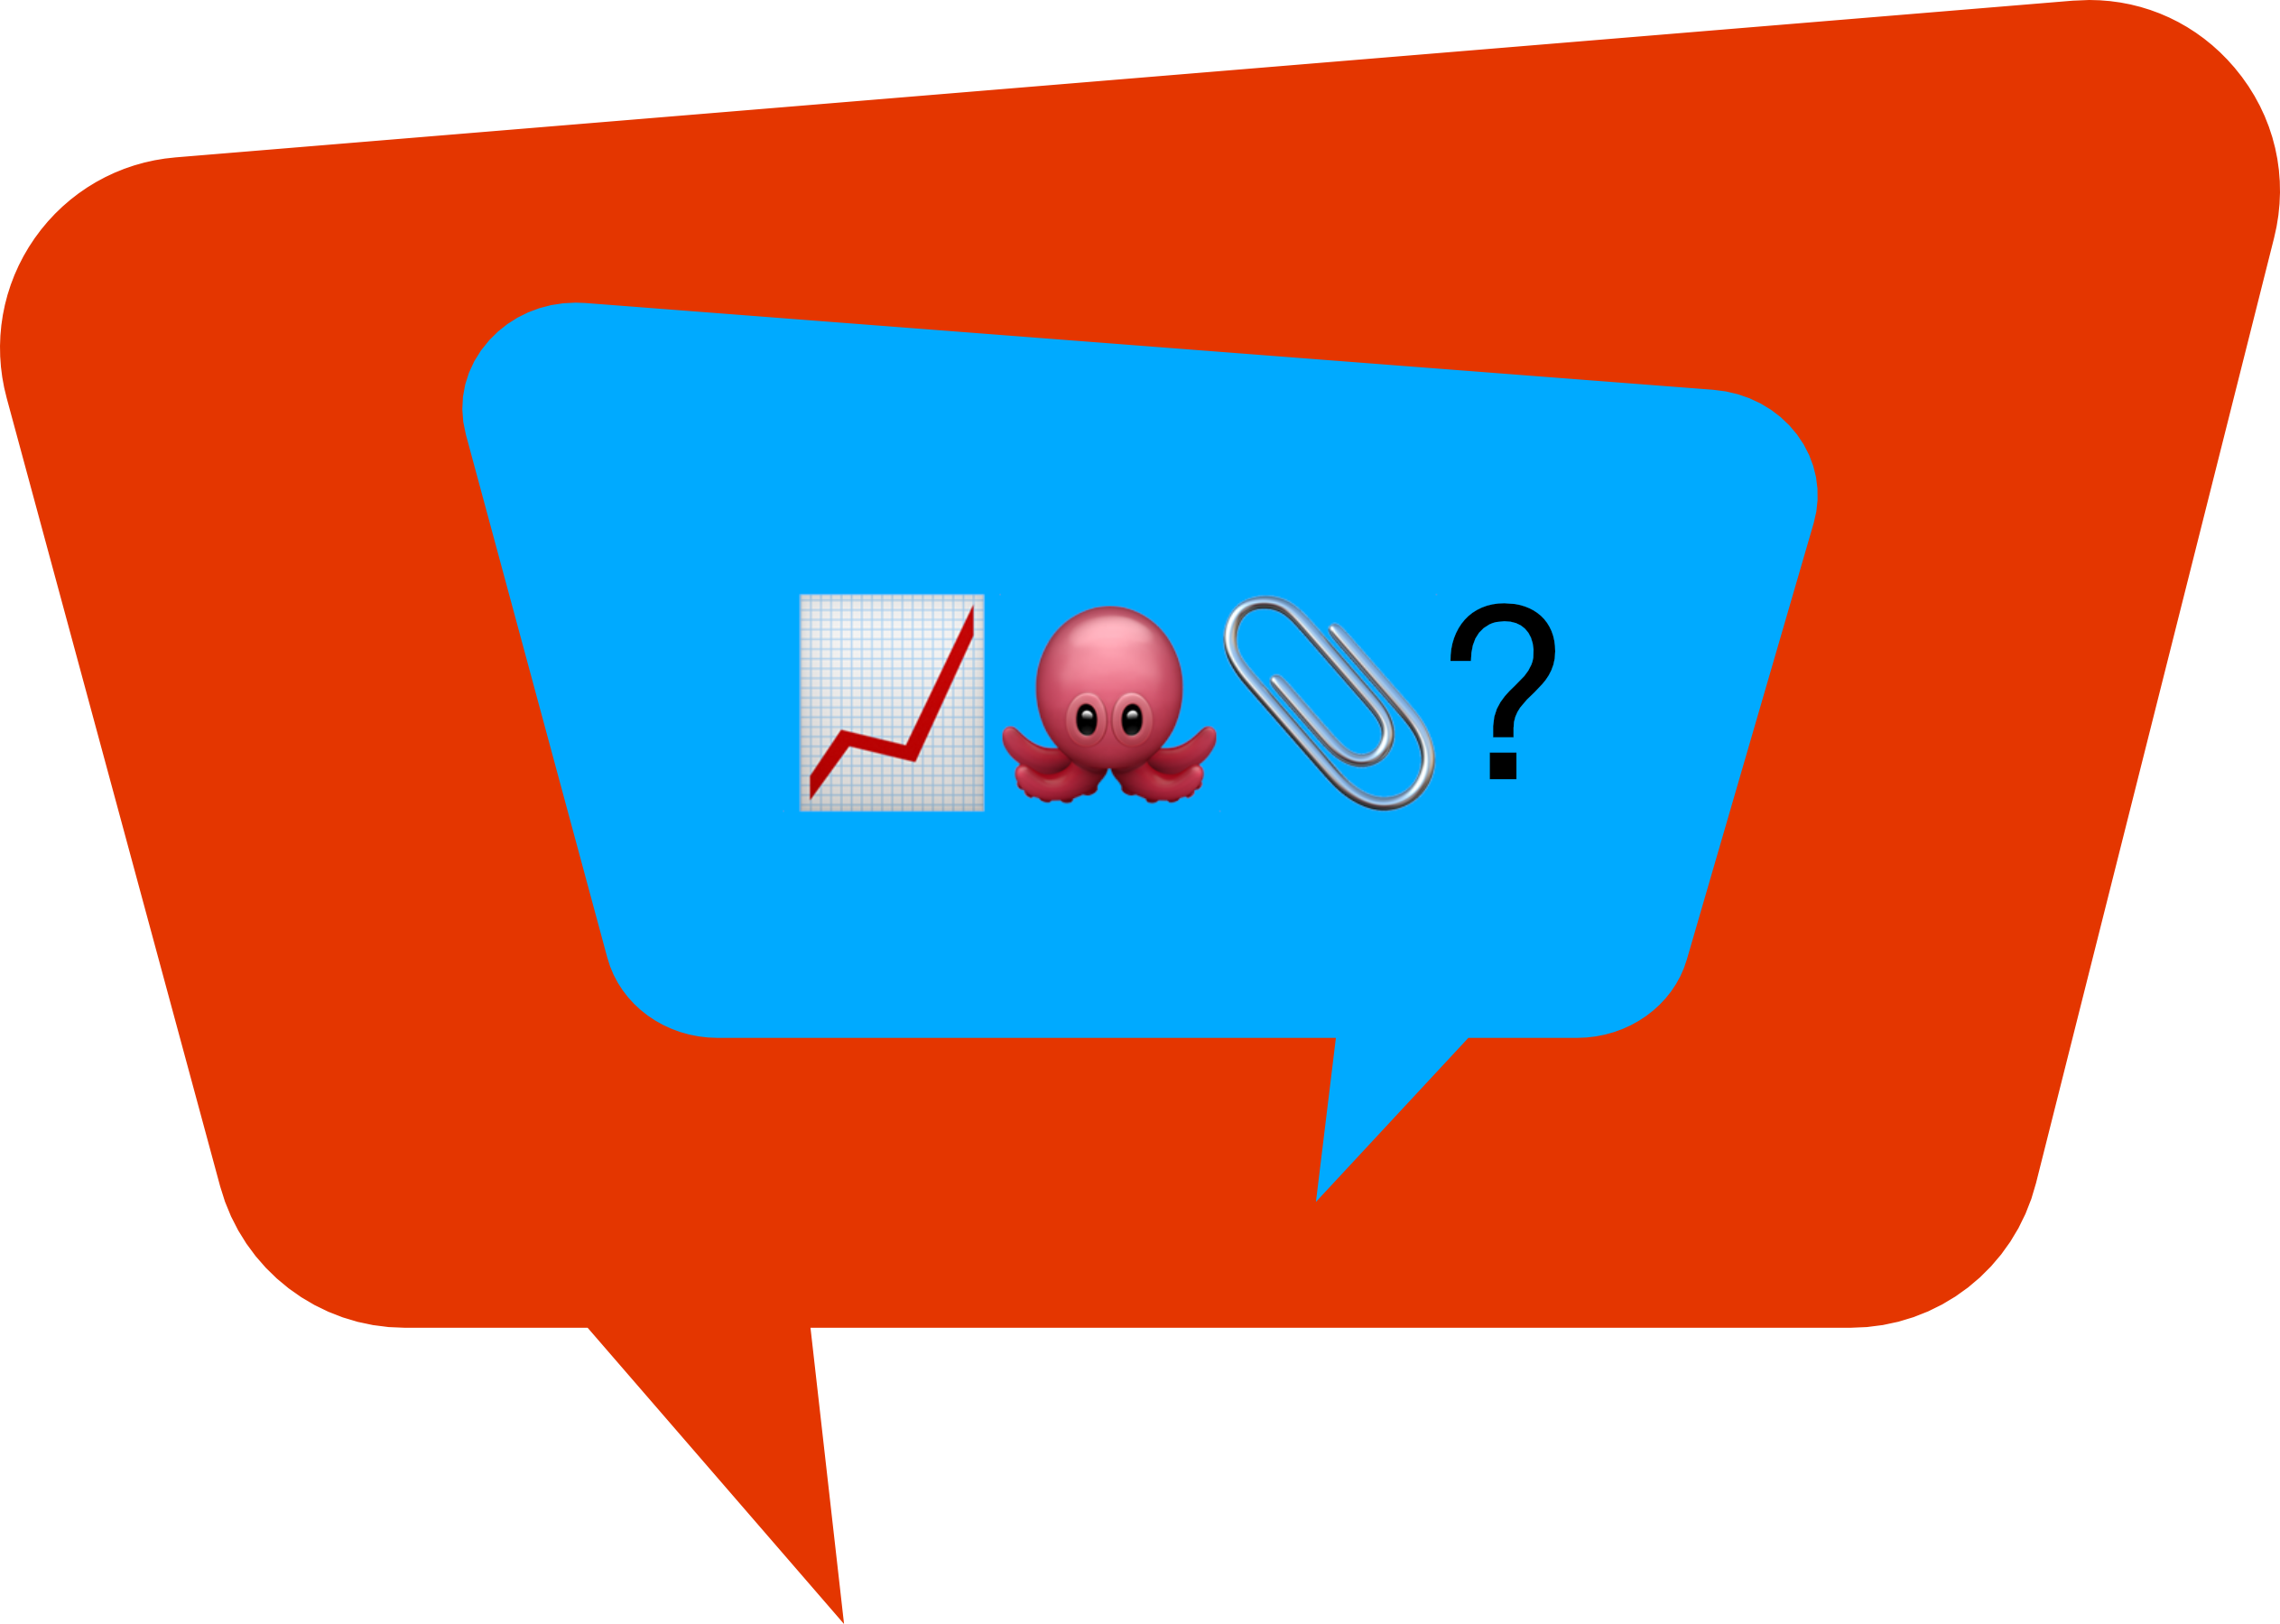 An image of a speech bubble embedded in another speech bubble. The inner bubble has a line graph, octopus, and paperclip emoji followed by a question mark.